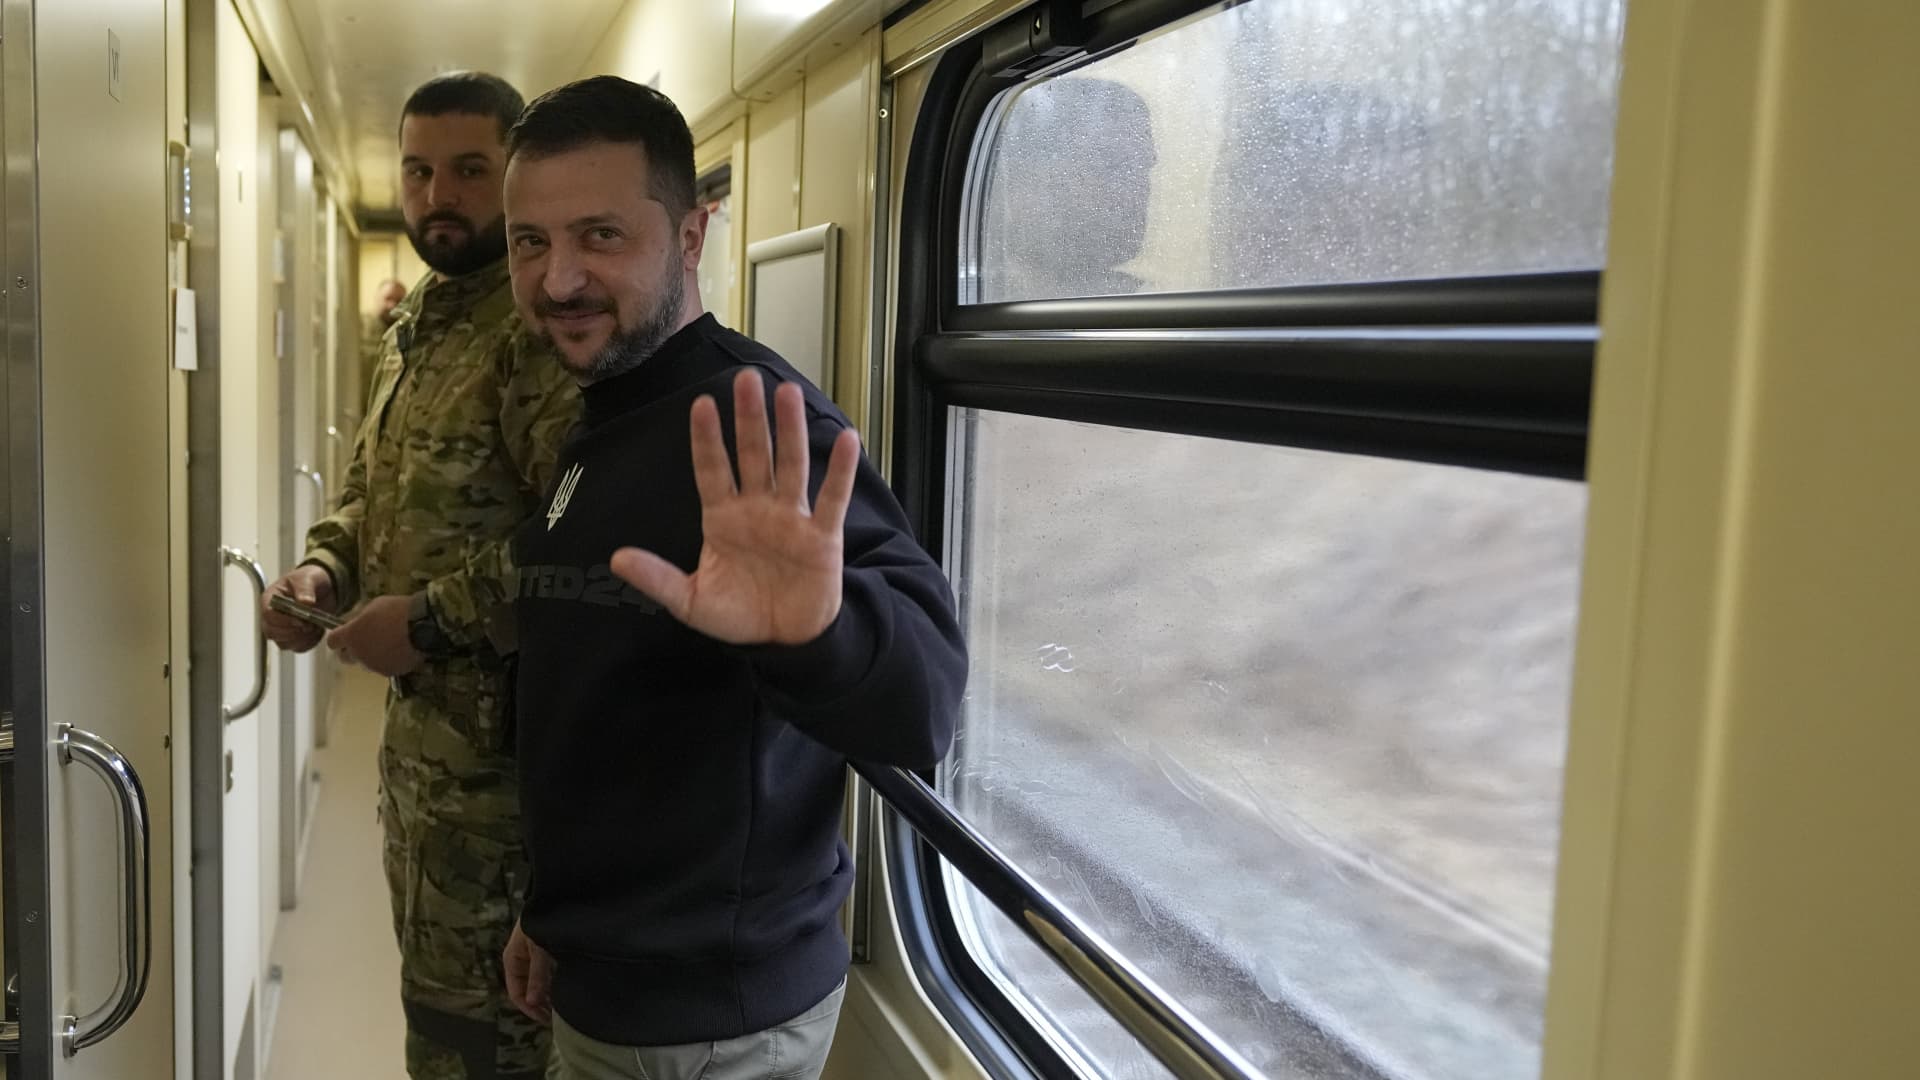 Ukrainian President Volodymyr Zelenskyy waves goodbye after an interview with The Associated Press on a train traveling from the Sumy region to Kyiv, Ukraine, Tuesday March 28, 2023.